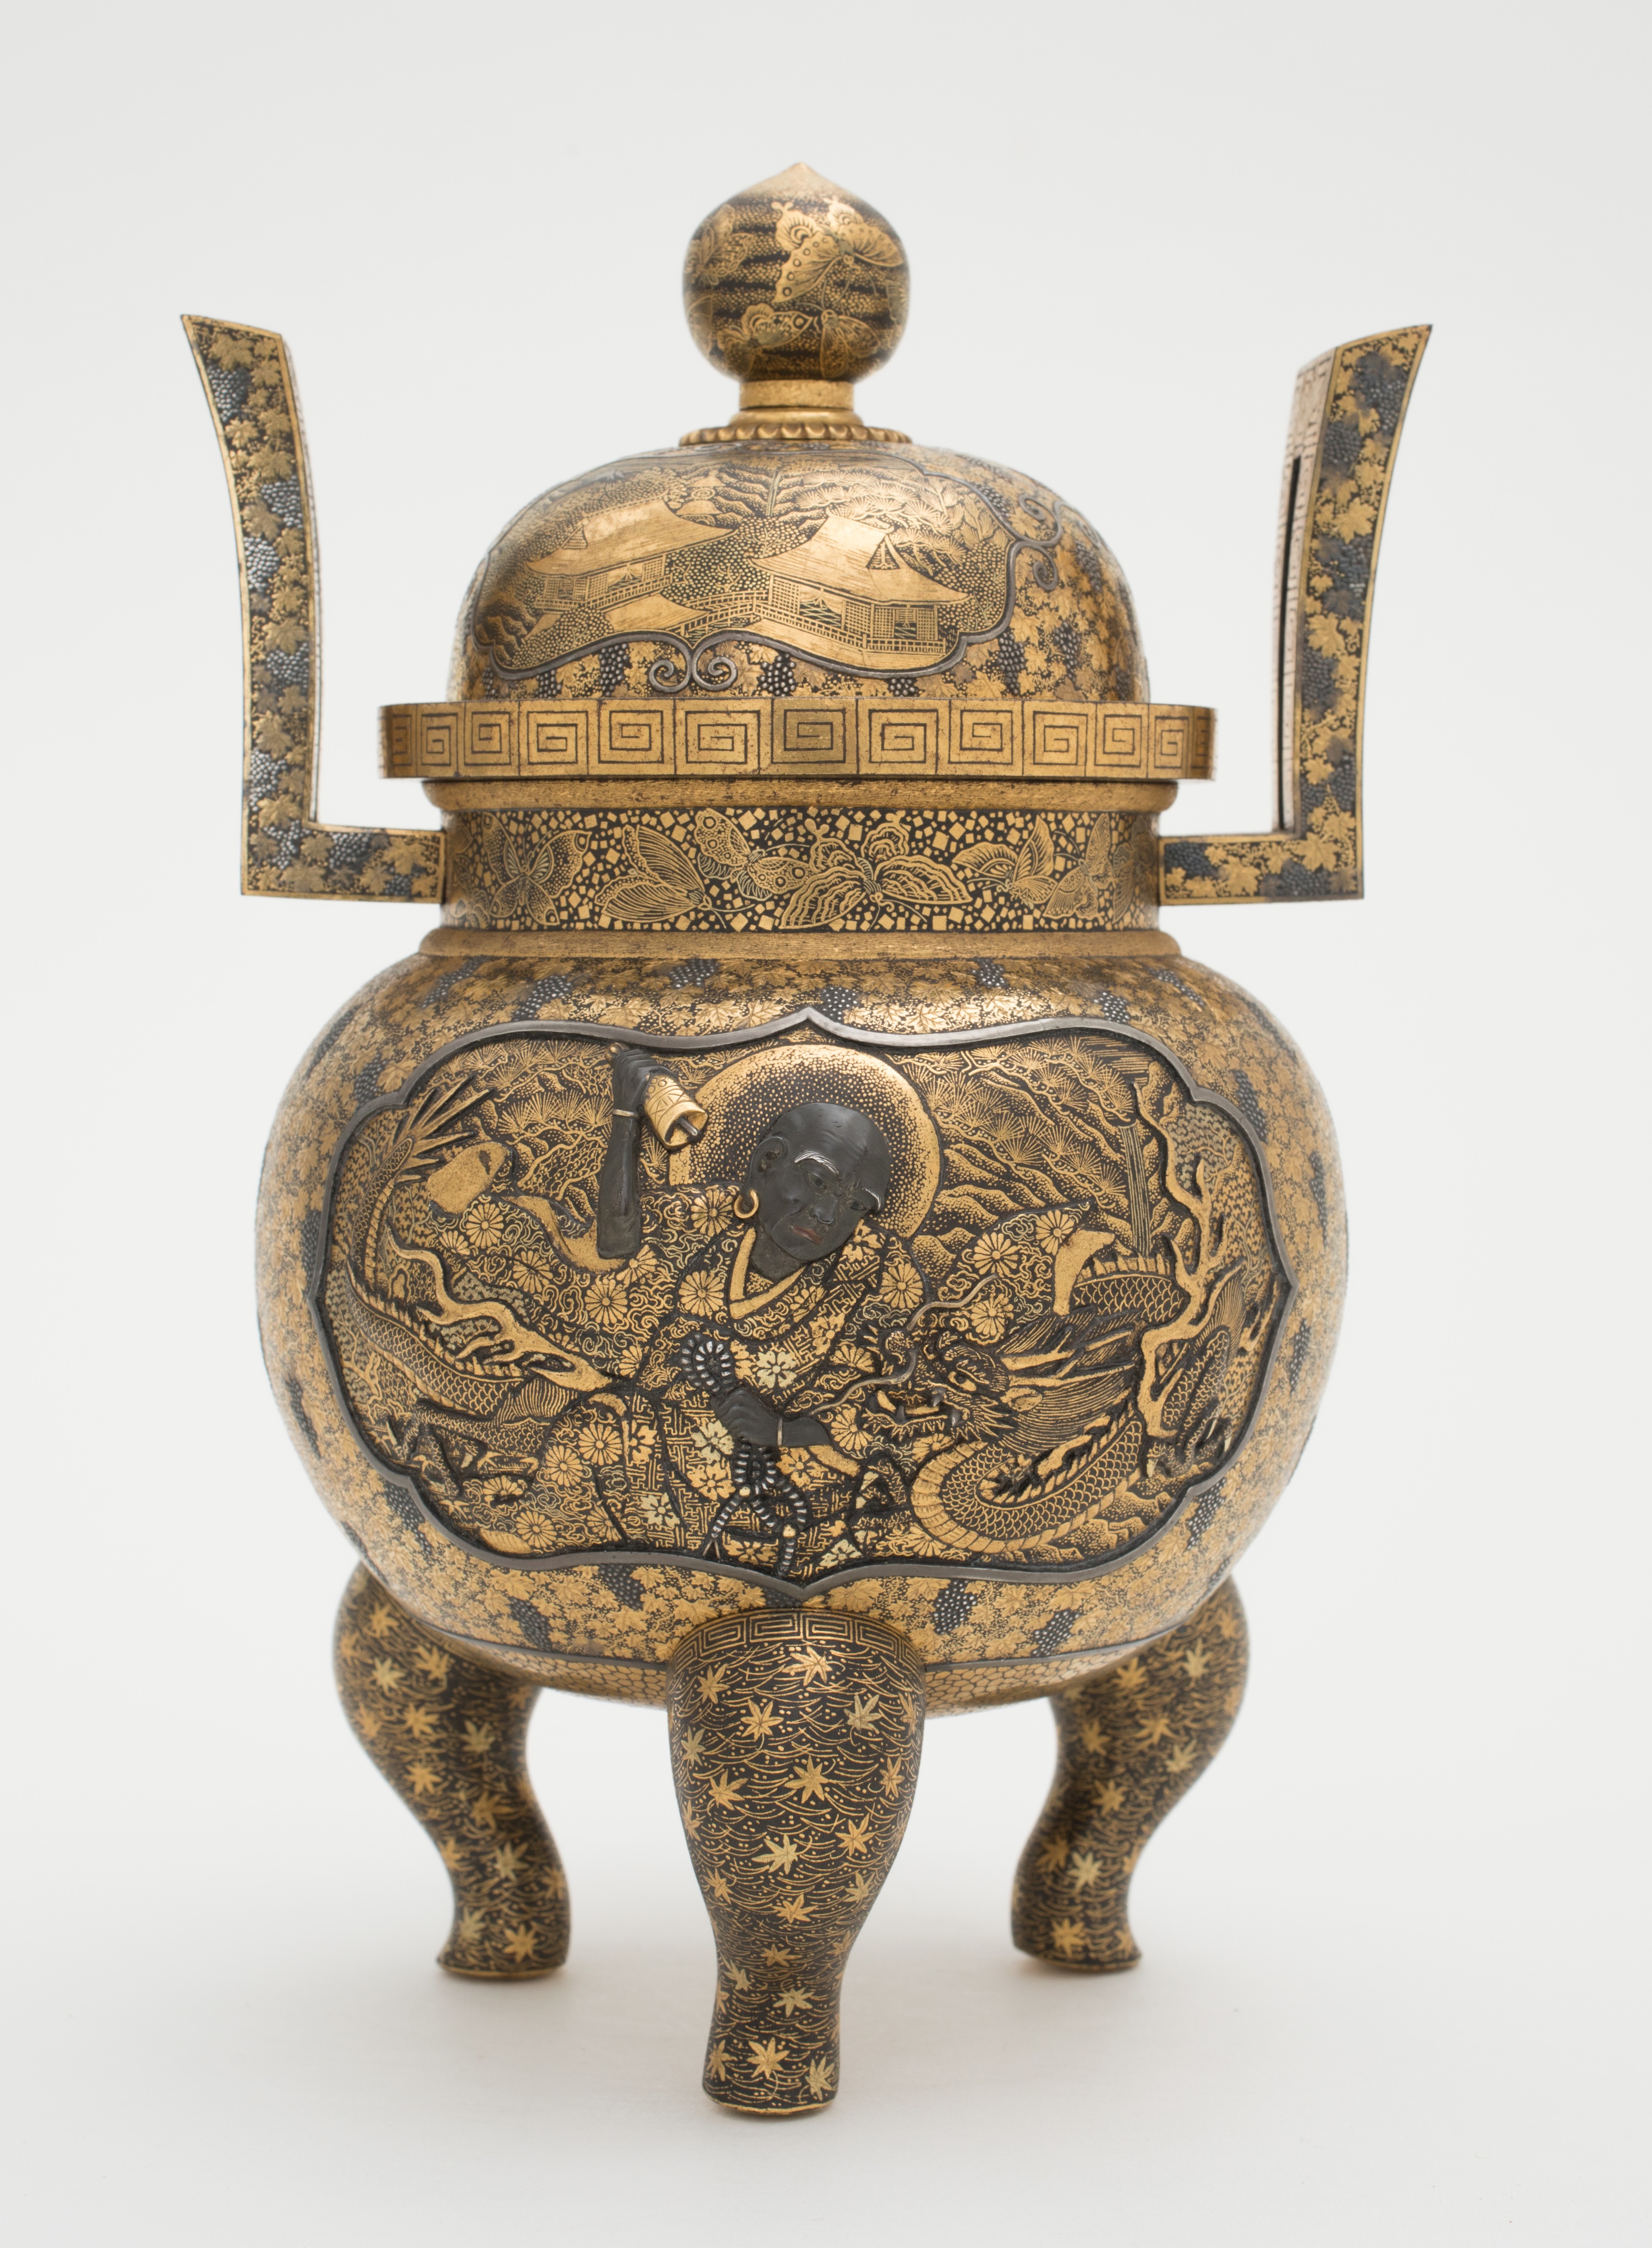 Three legged koro with lid and upright handles on either side. On the belly of the incense burner is a dragon and a budda who is holding a bell in one hand and a string of beads in his other